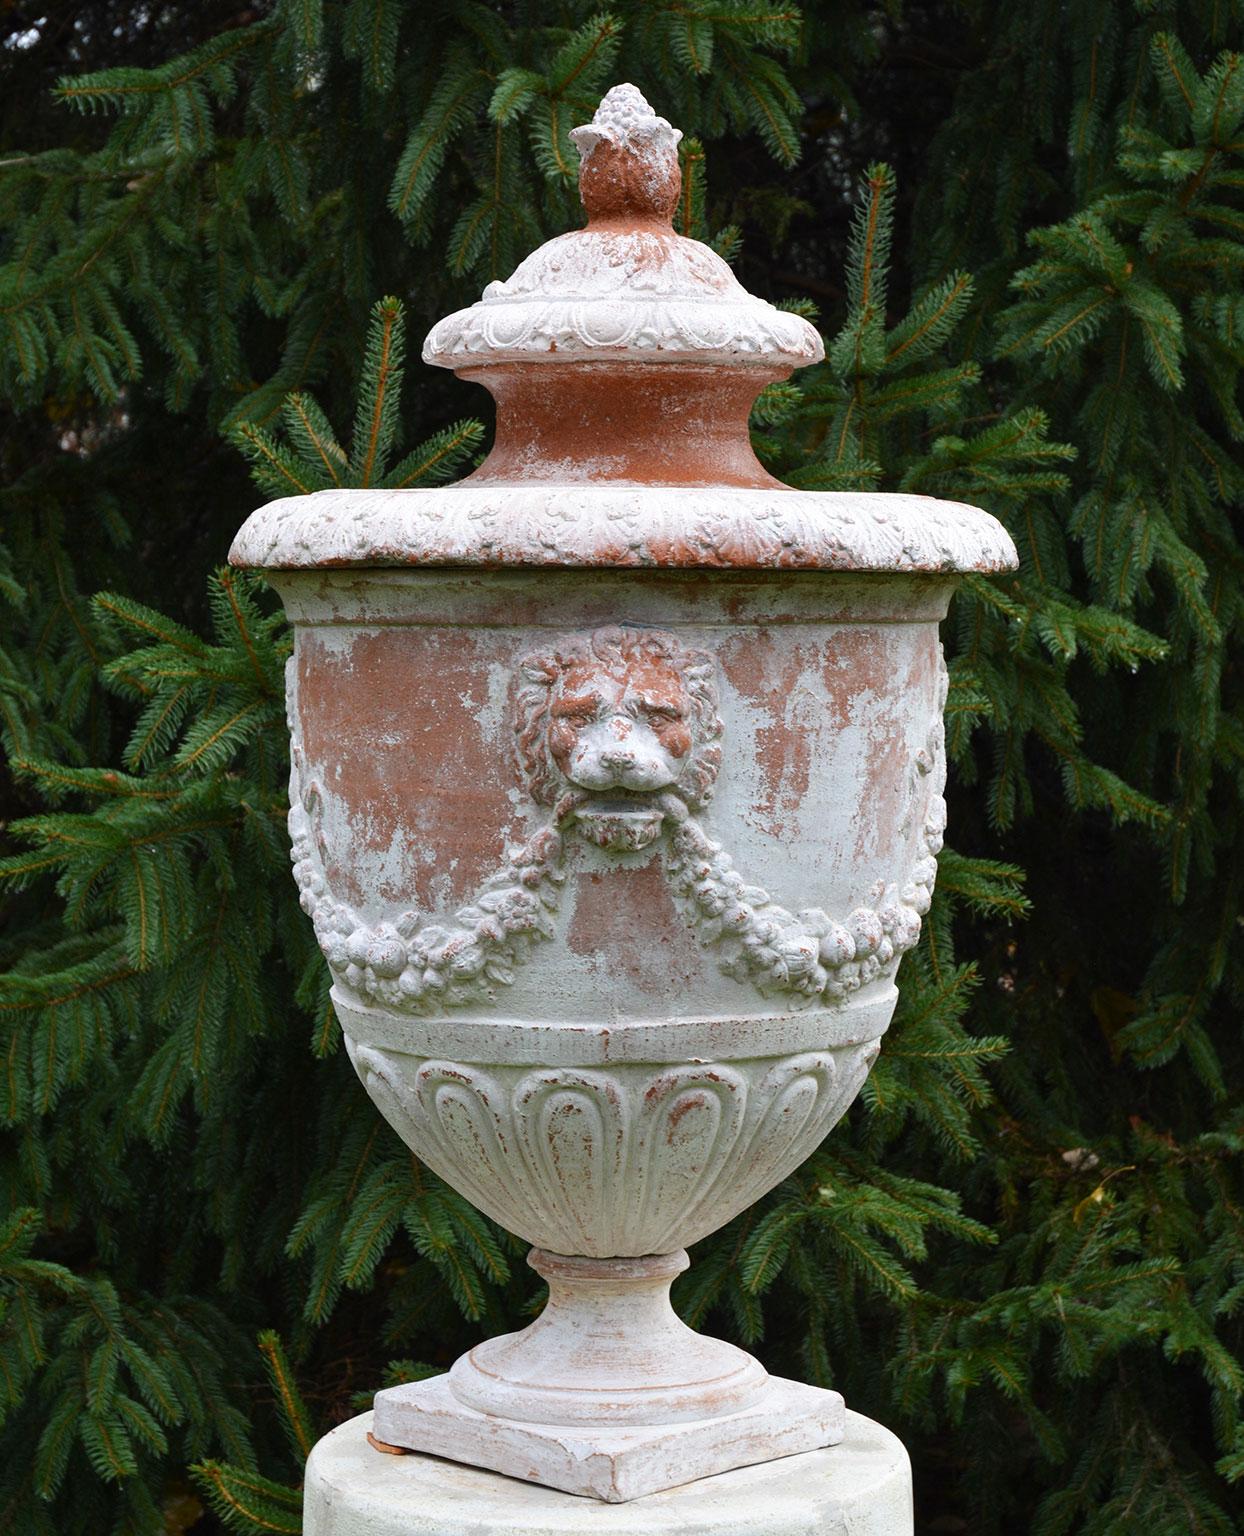 Cast White Painted Terra-cotta Urn with Lid on White Stone Pedestal